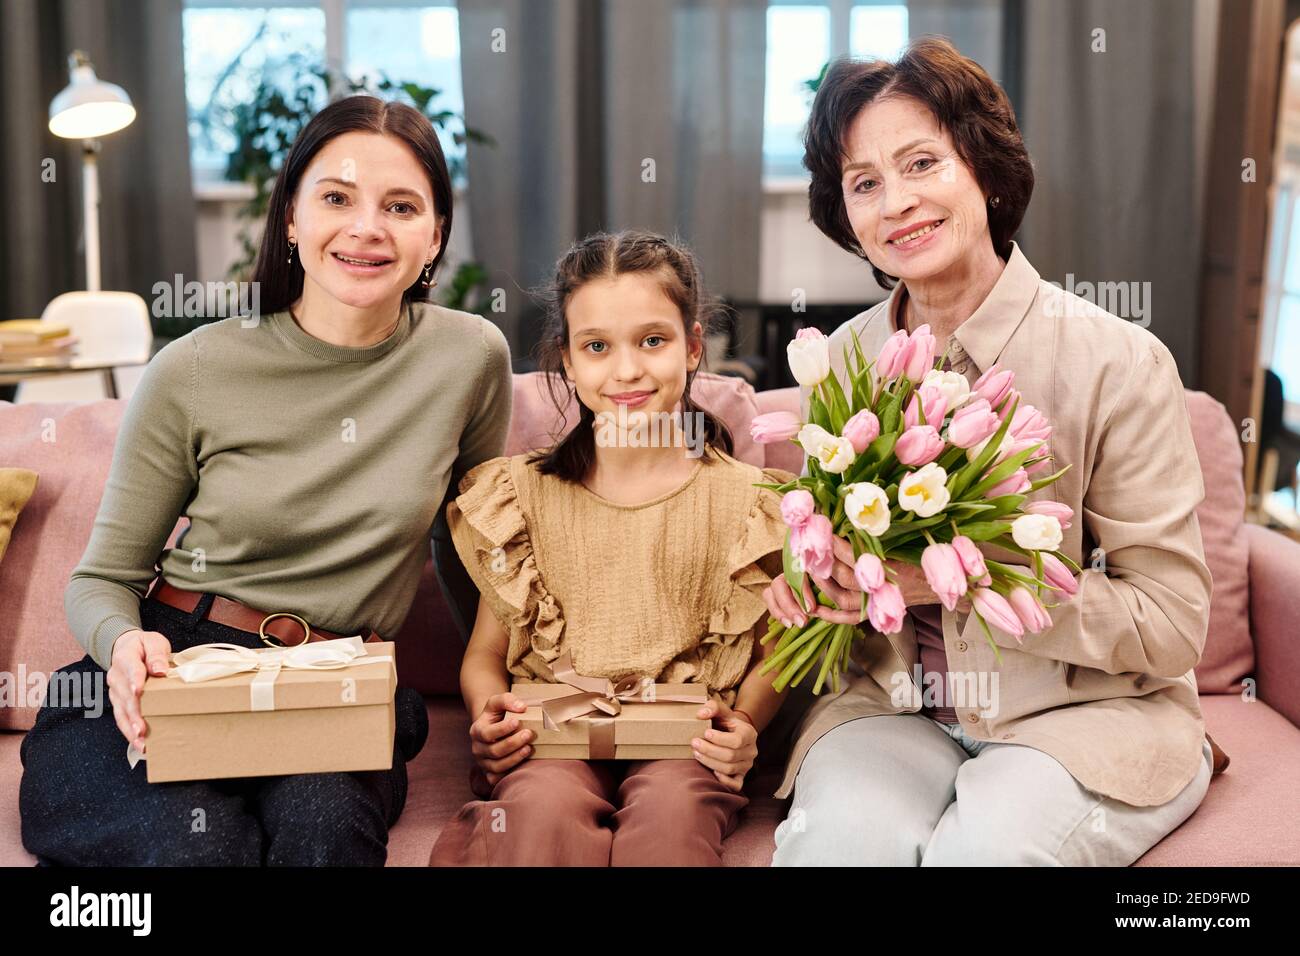 Two cheerful females in casualwear and adorable little girl holding packed giftboxes with presents and bunch of gresh tulips while sitting on couch Stock Photo